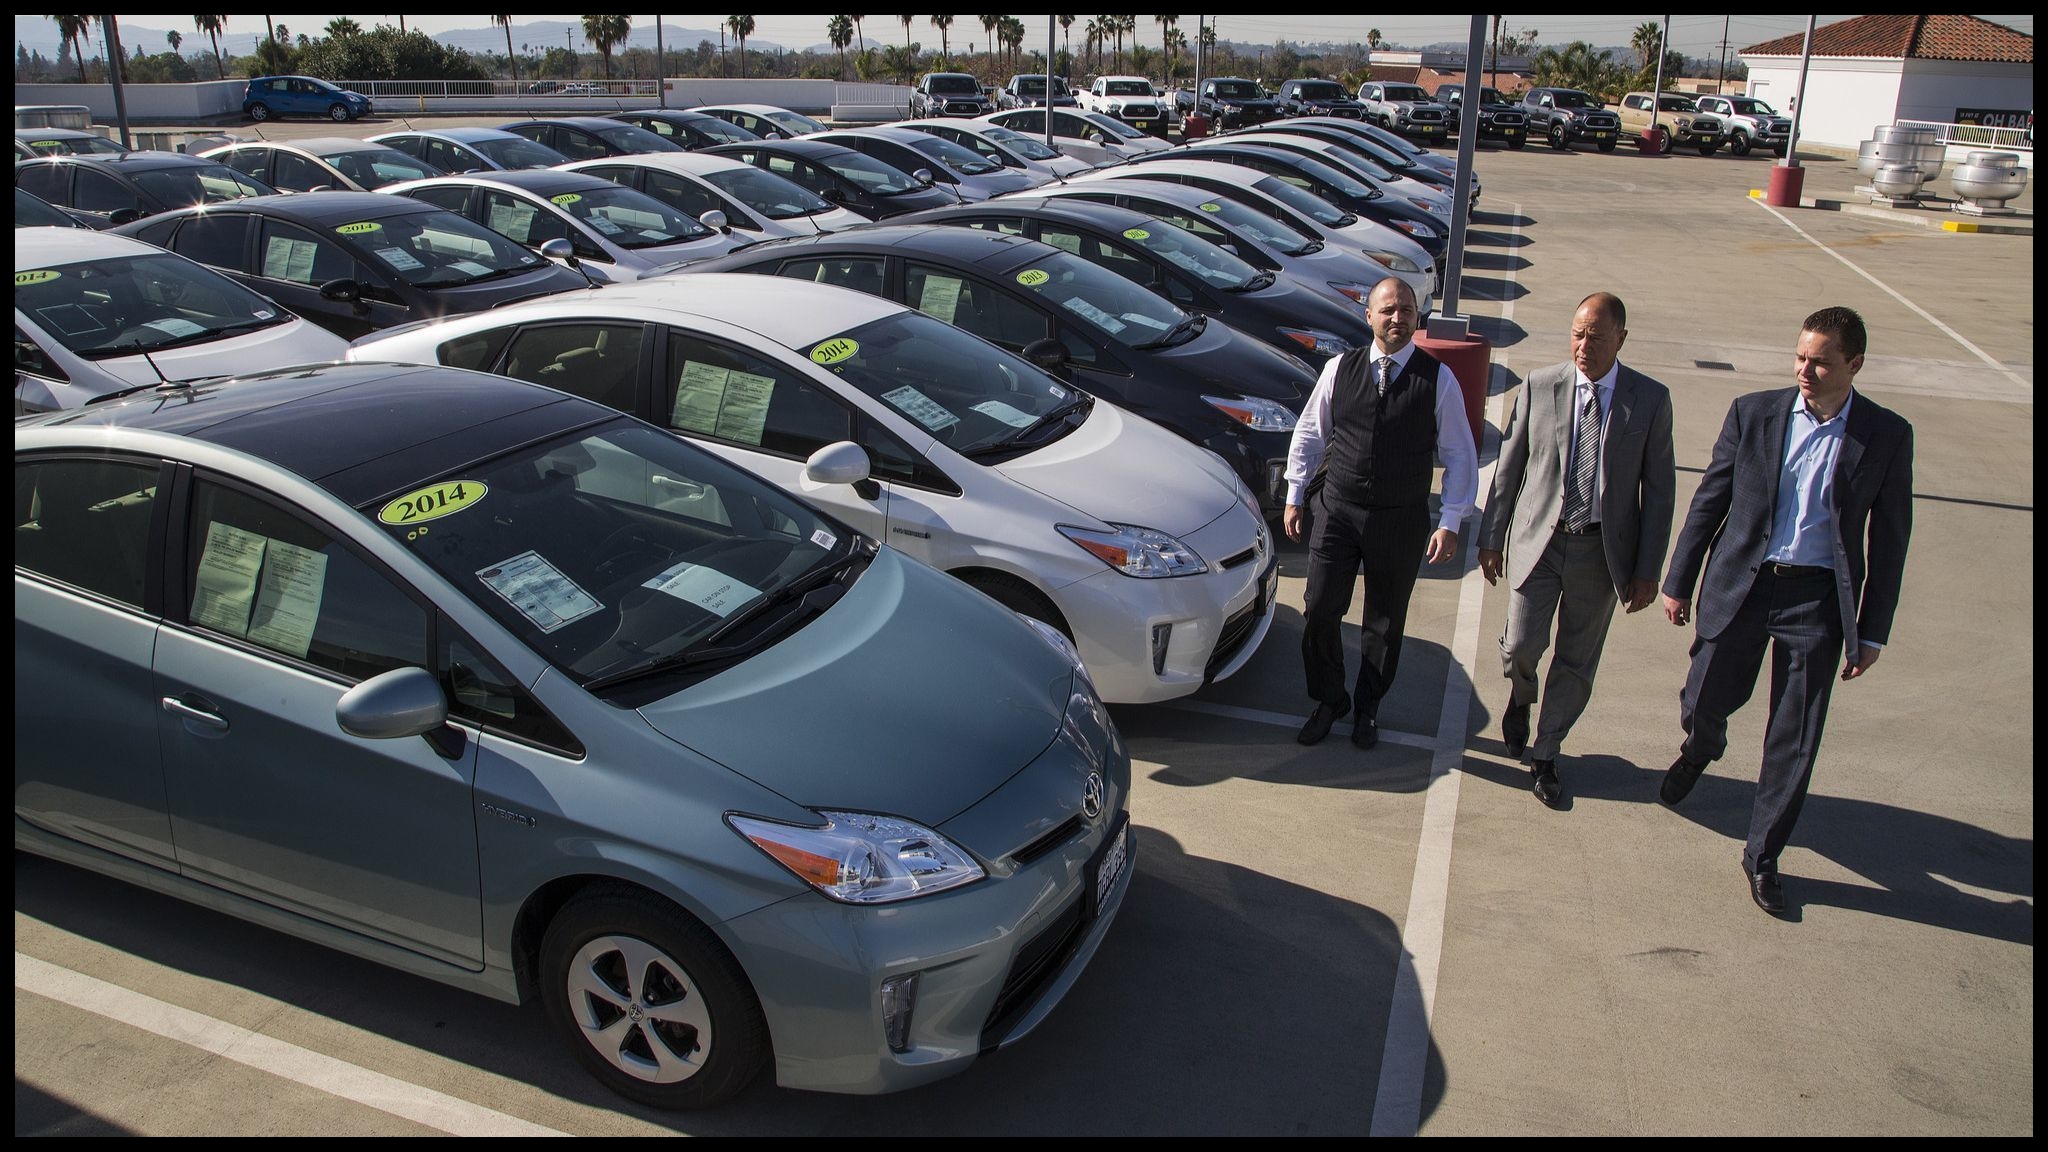 Toyota issues a safety recall for 2 4 million Prius Auris hybrids to fix a defect in their electronics Los Angeles Times